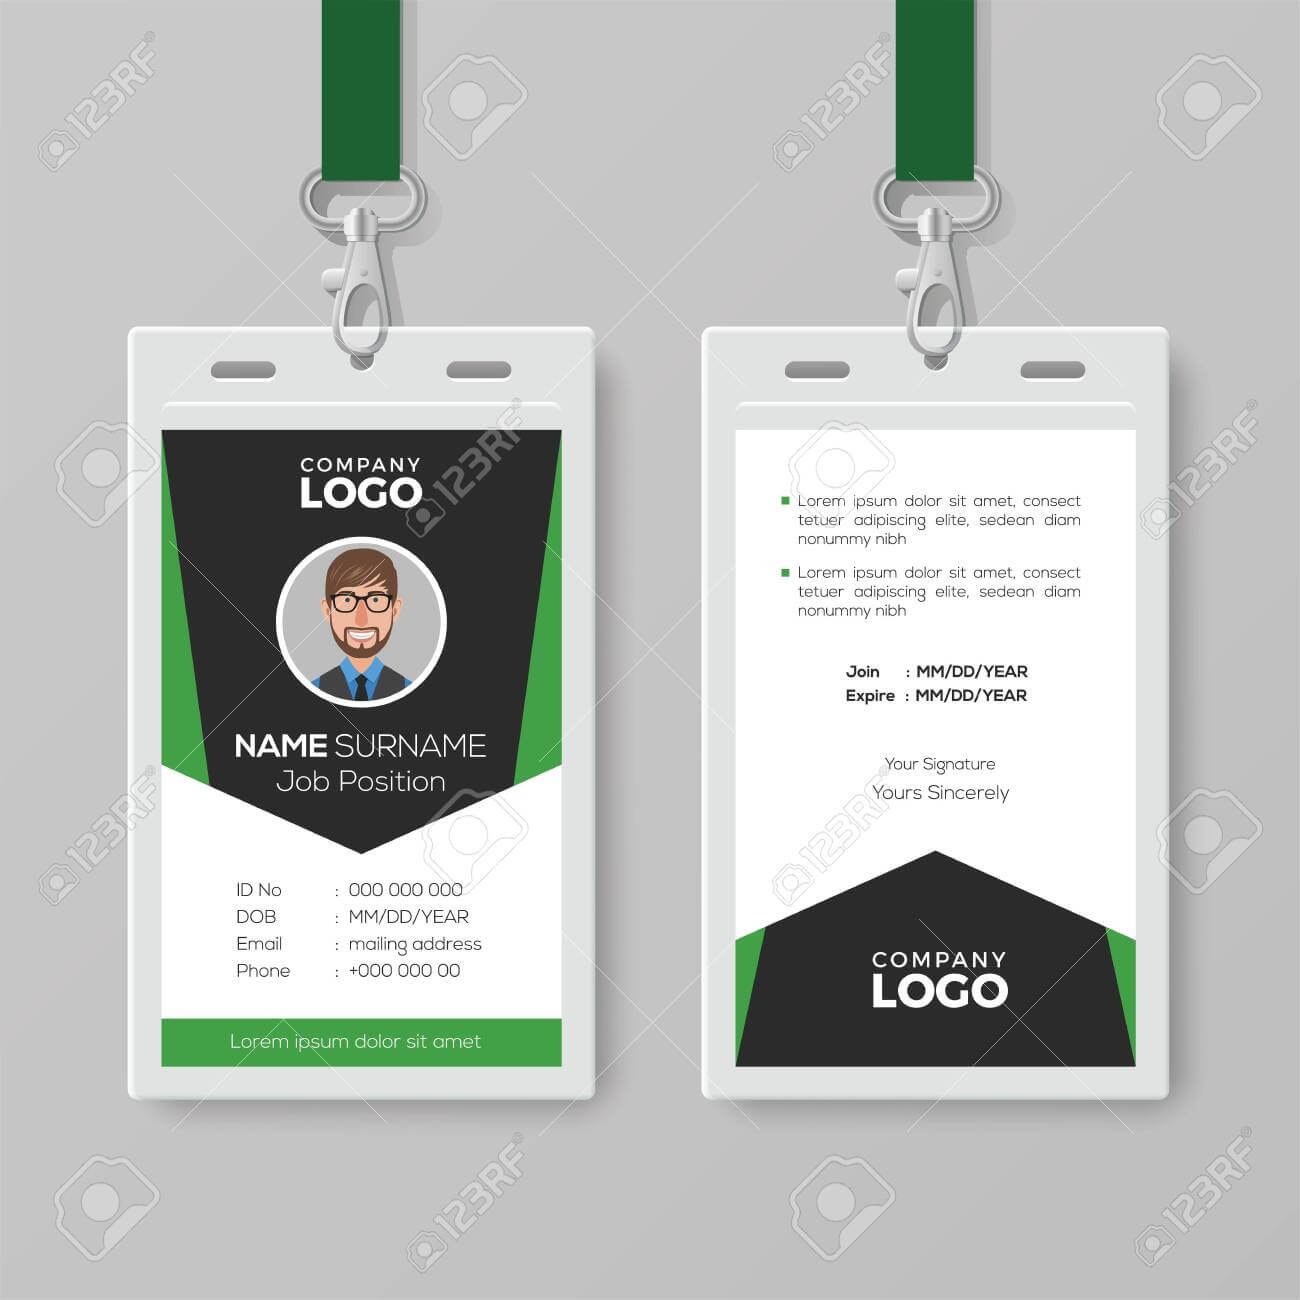 Creative Corporate Id Card Template With Green Details Intended For Work Id Card Template